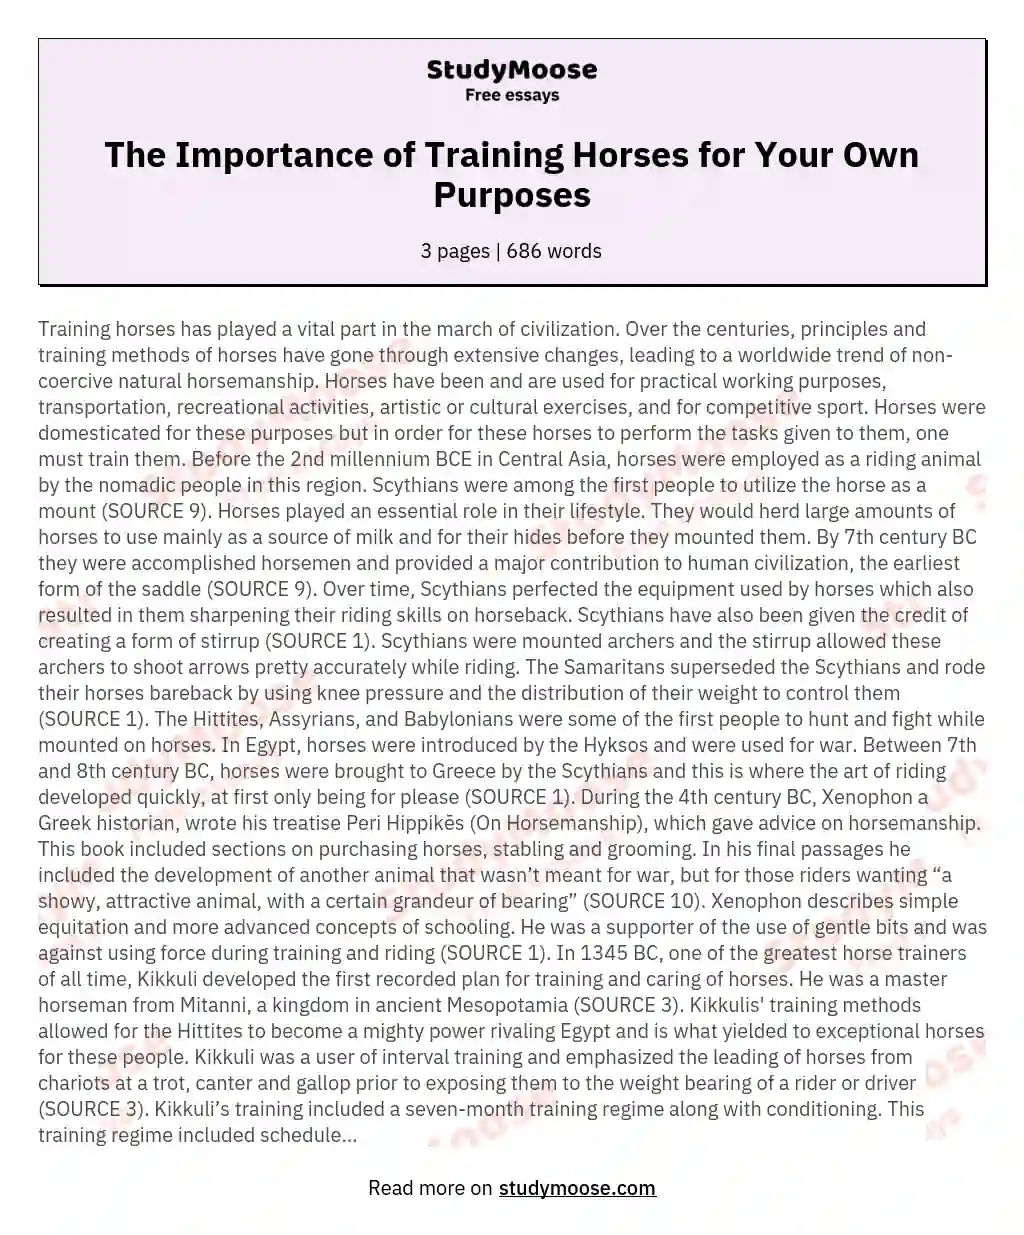 The Importance of Training Horses for Your Own Purposes essay